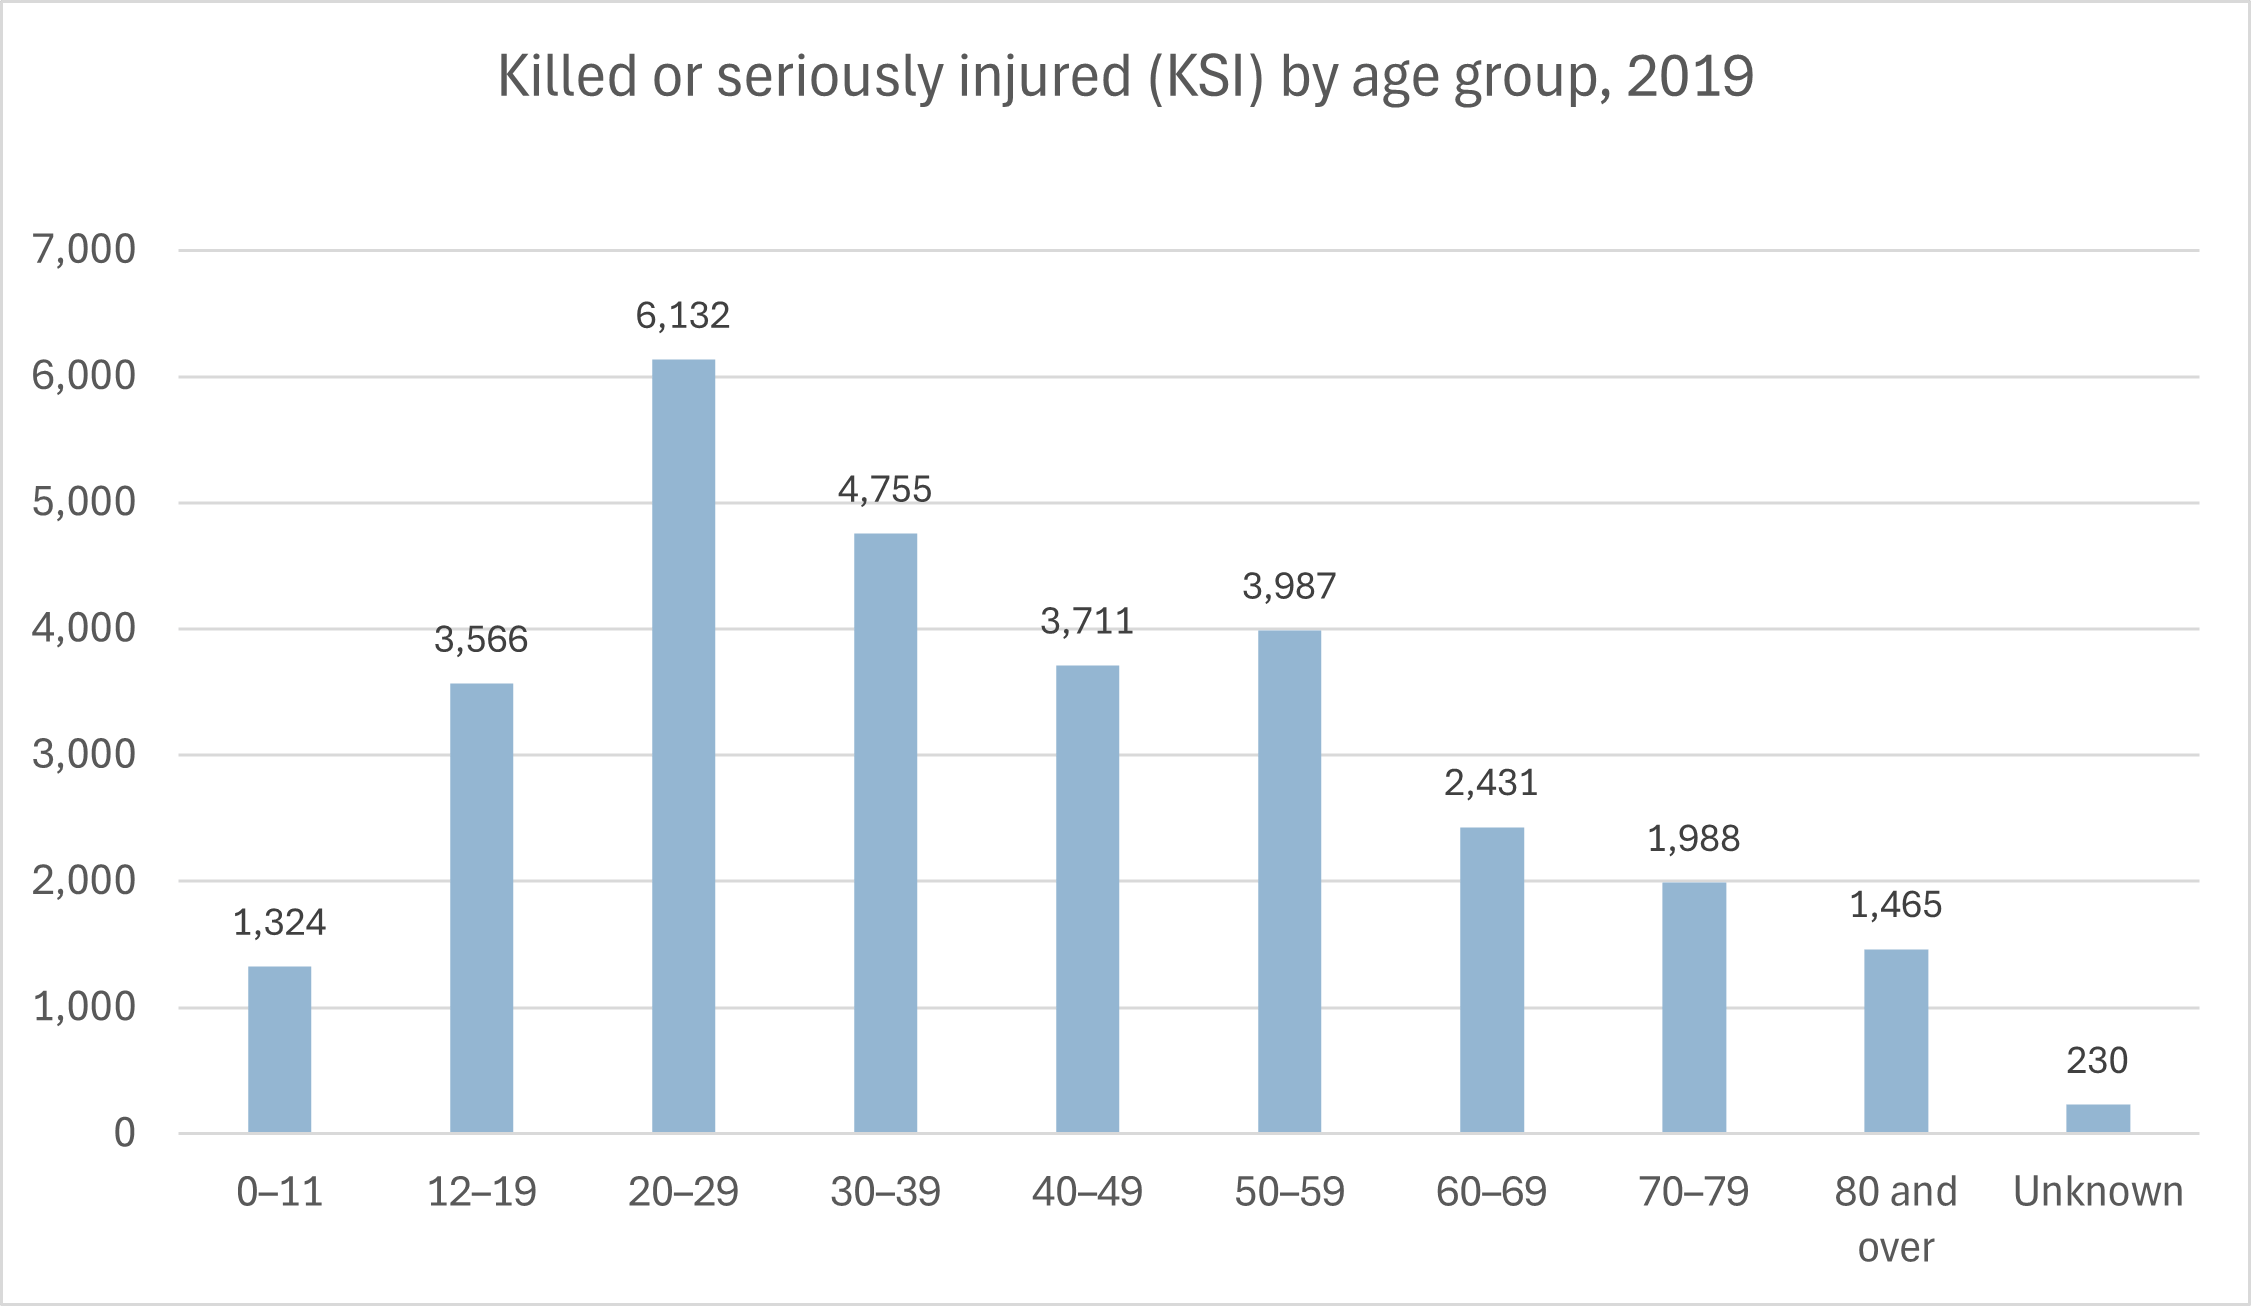 KSI by age group 2019